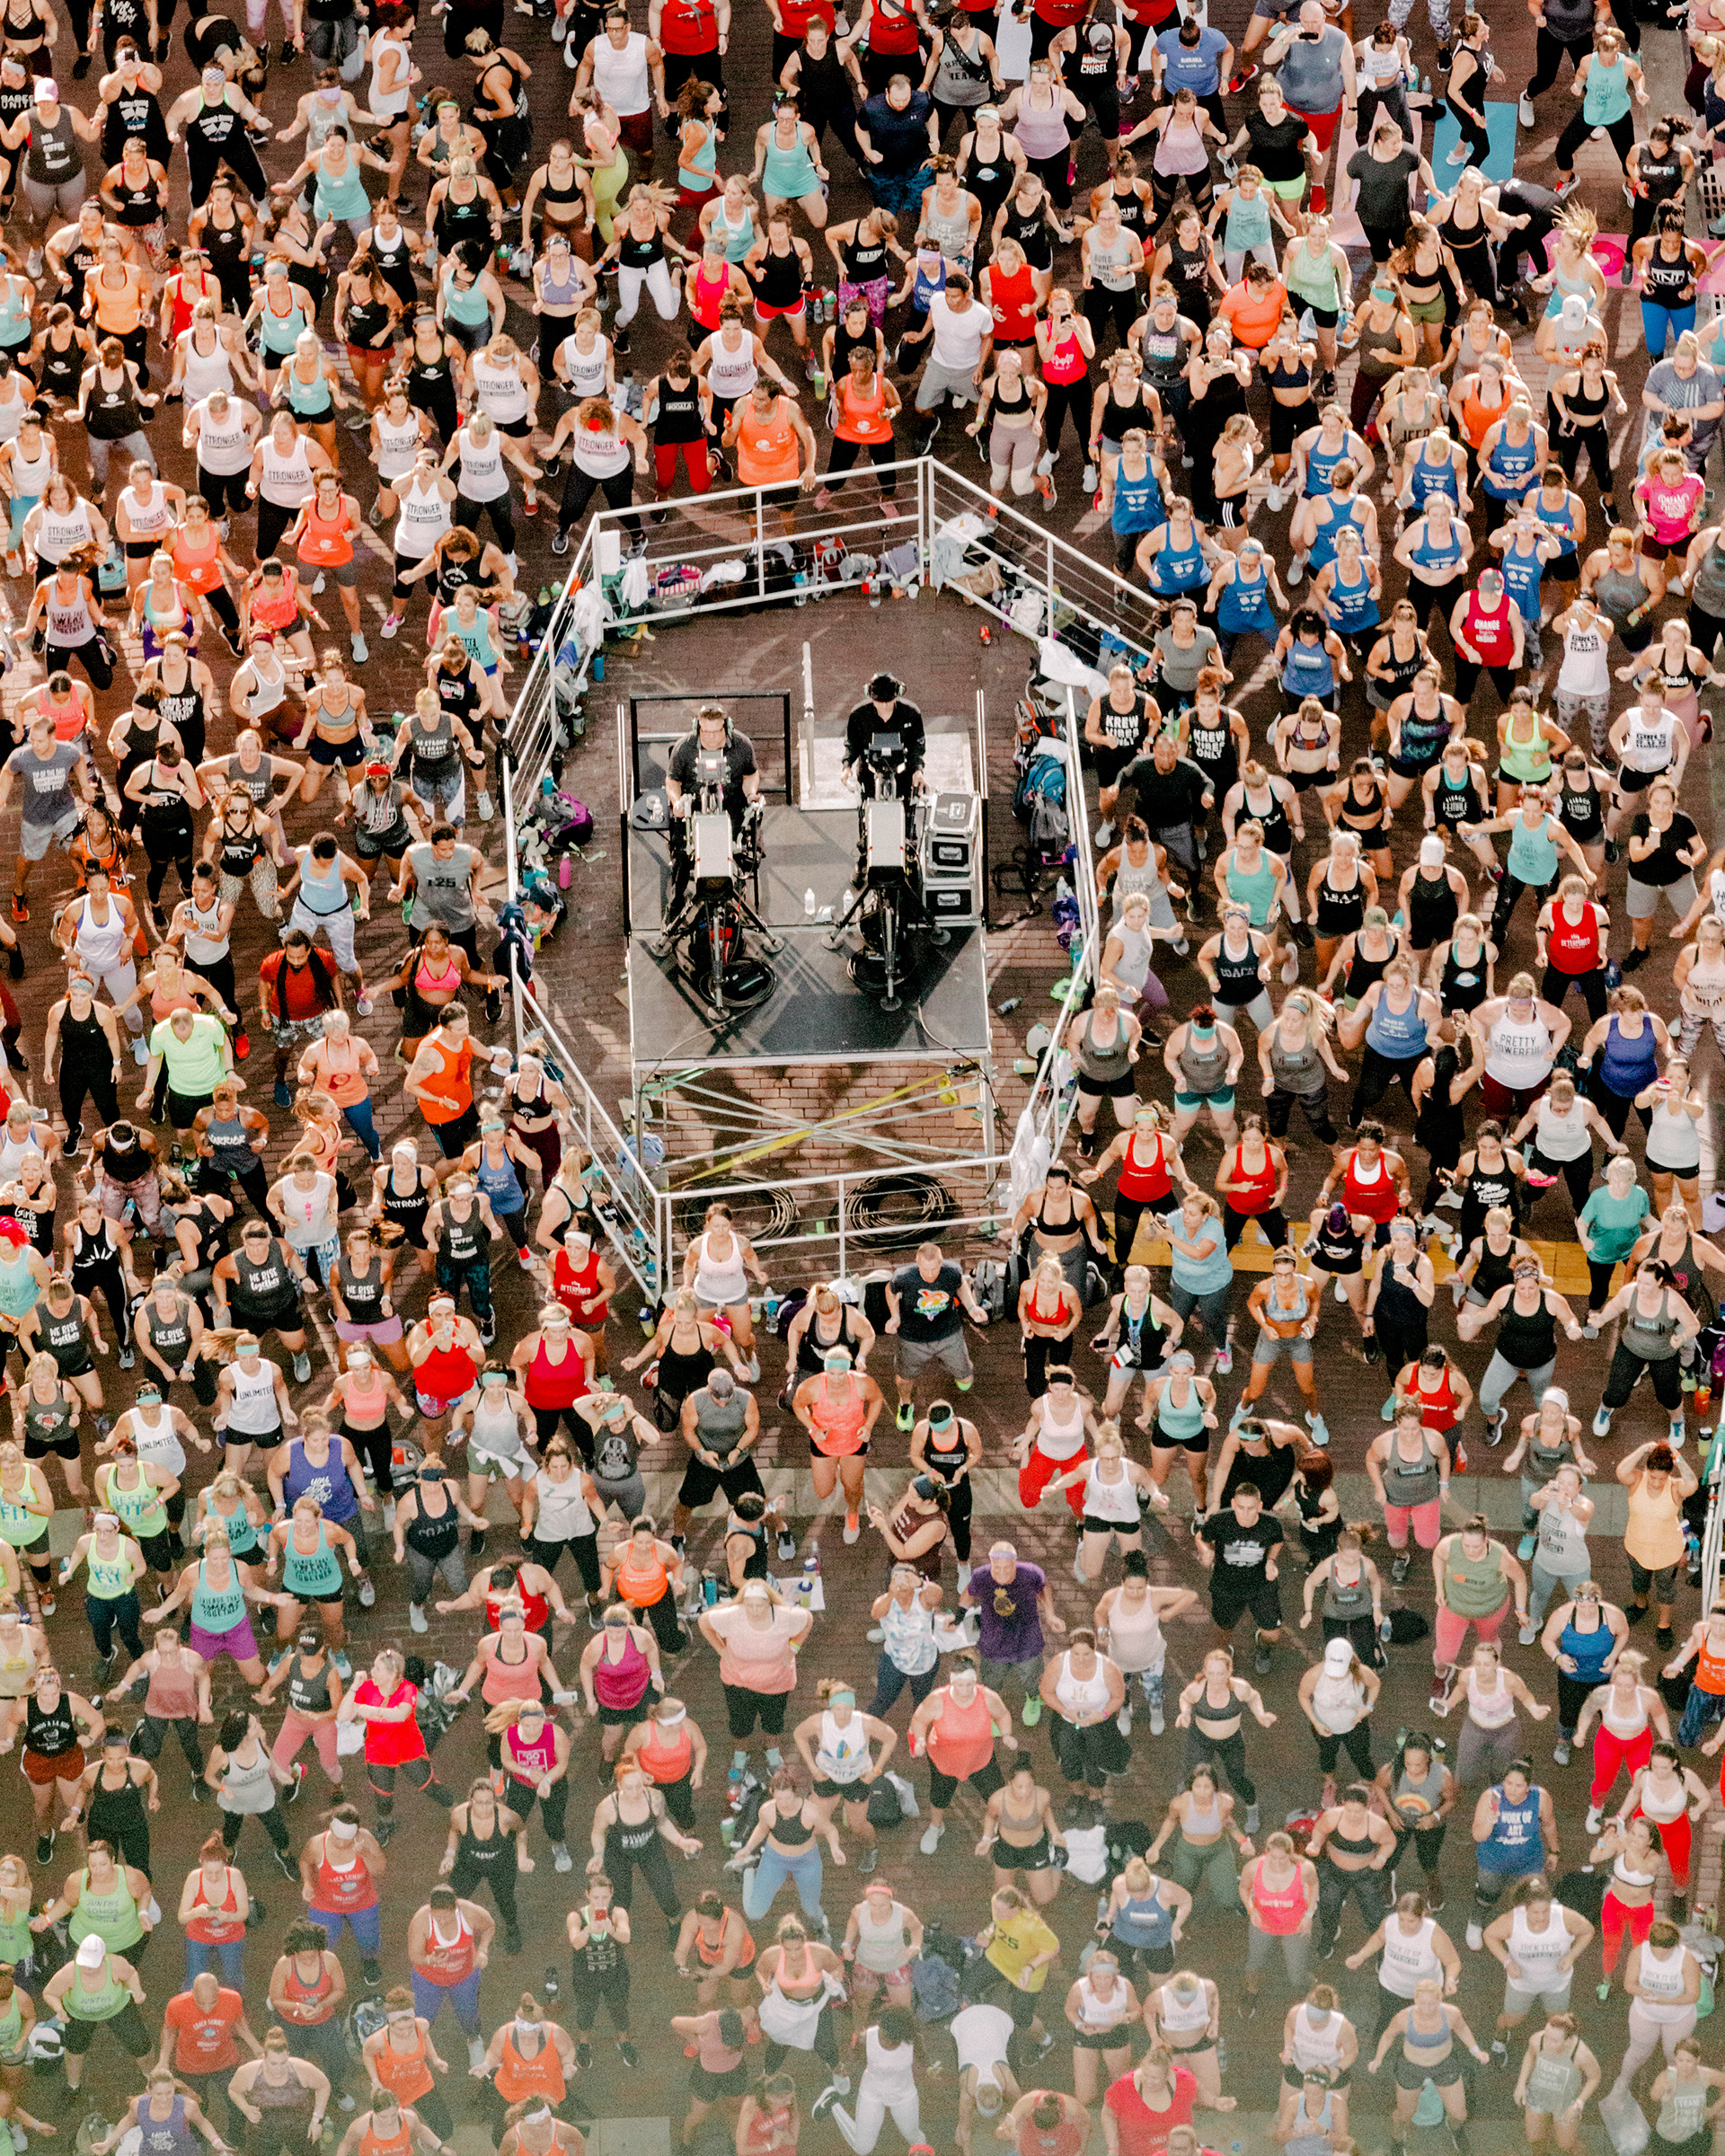 The Beachbody summit in 2019 drew thousands hoping to earn money selling the company’s products and fitness routines (Evan Jenkins for TIME)